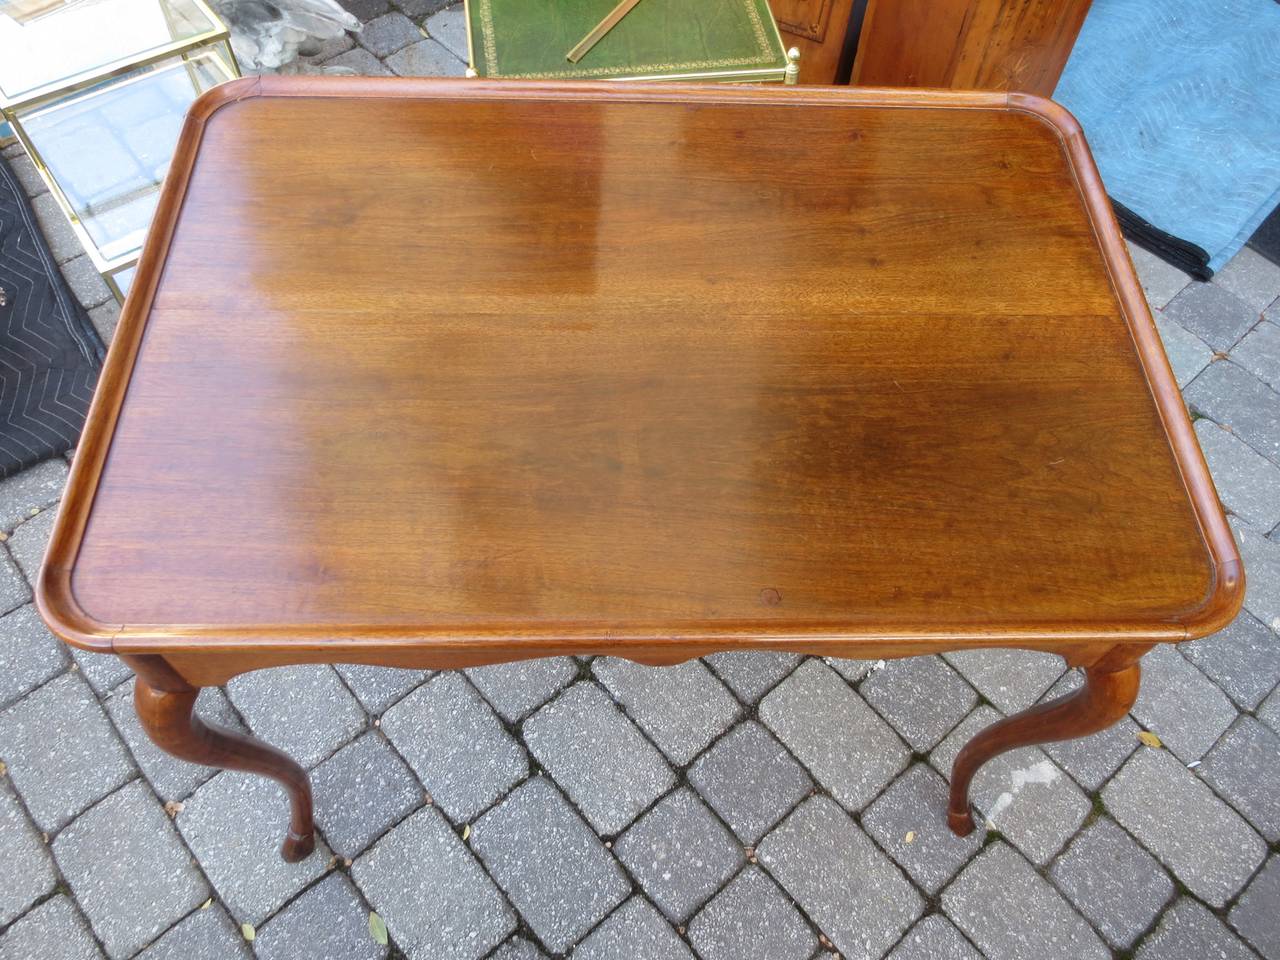 18th-19th century French Fruitwood table.